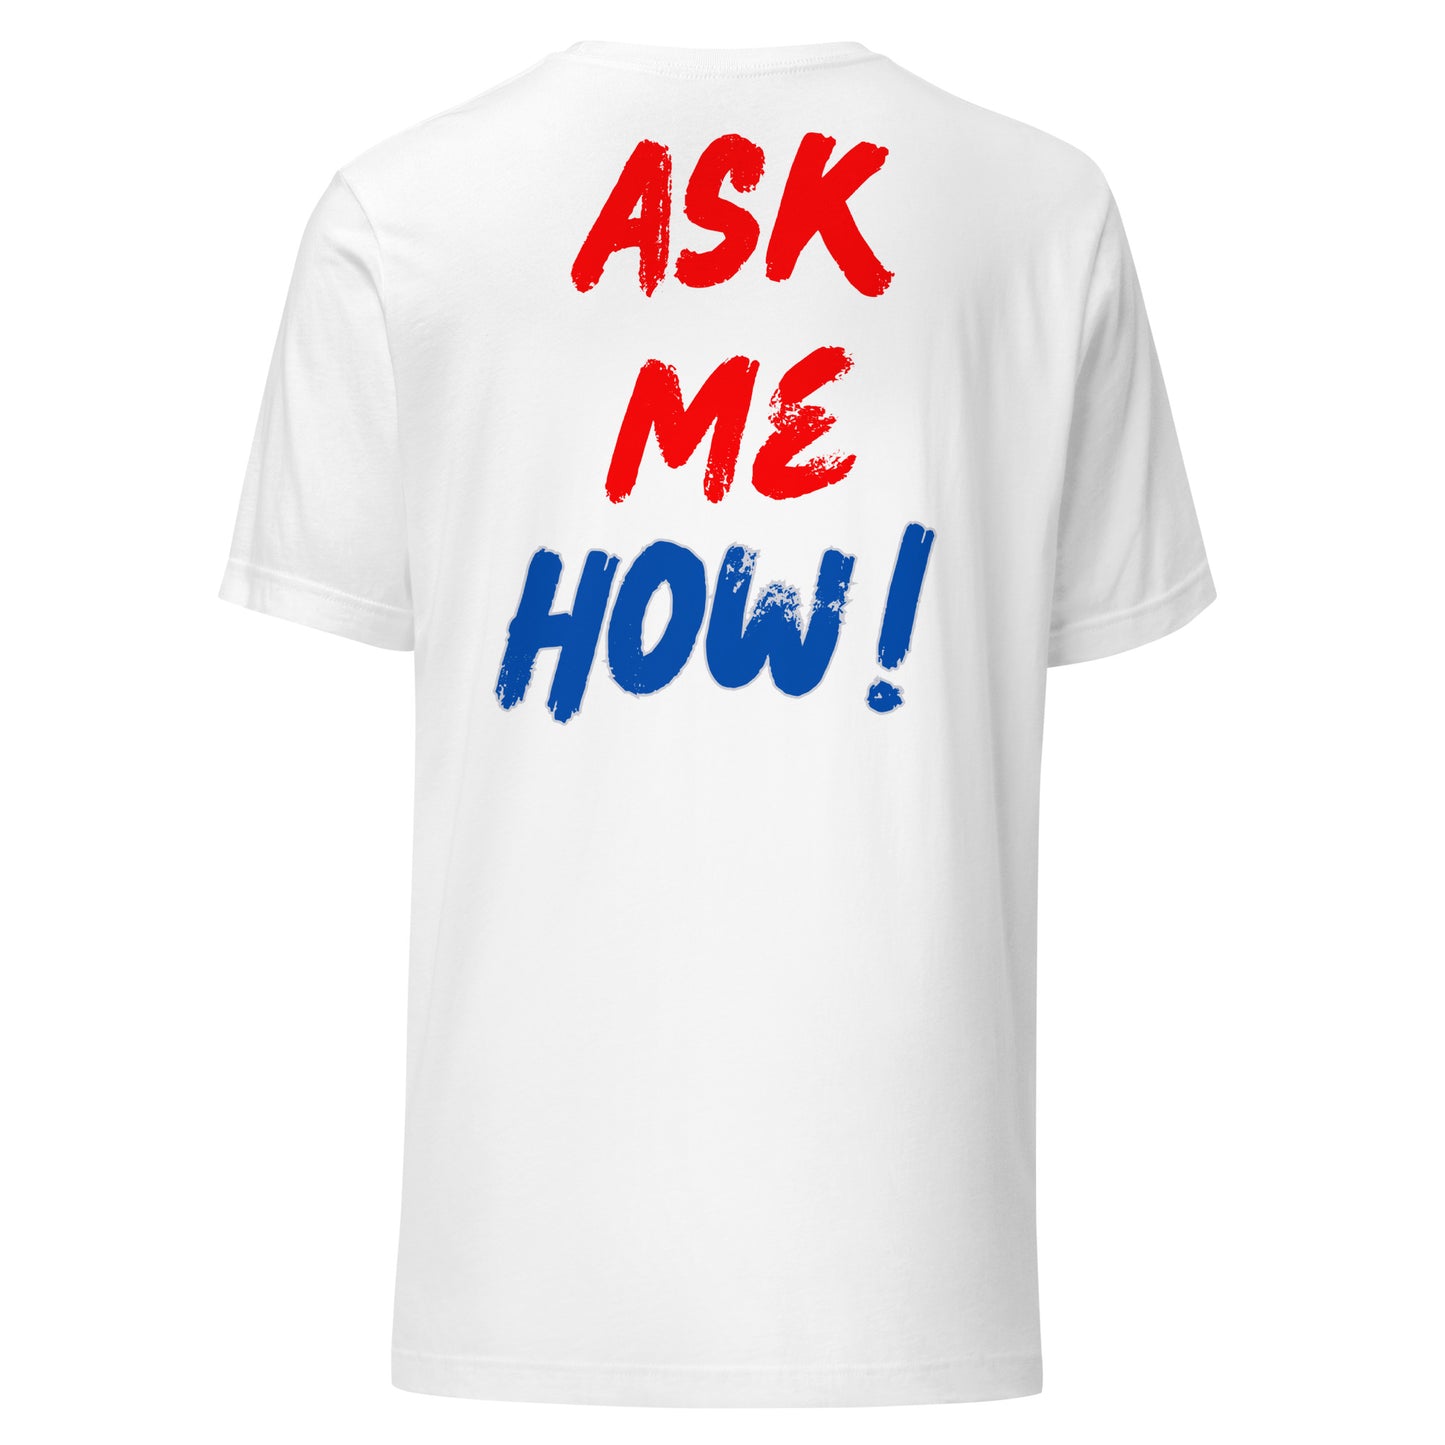 ASK ME (BLUE & RED)